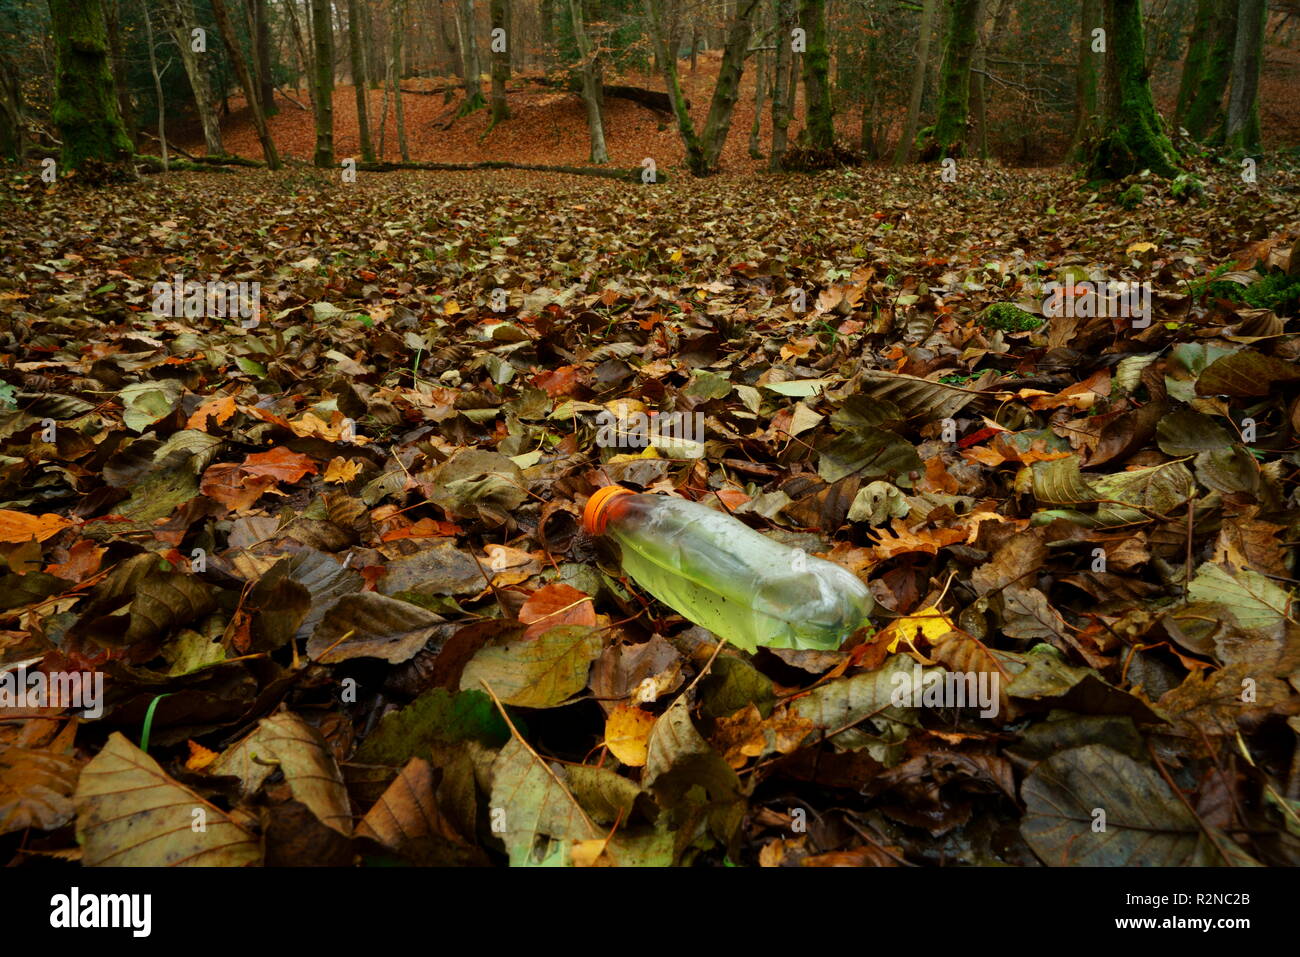 Ashdown Forest Sussex UK a plastic bottle discarded in a woodland enviroment Stock Photo